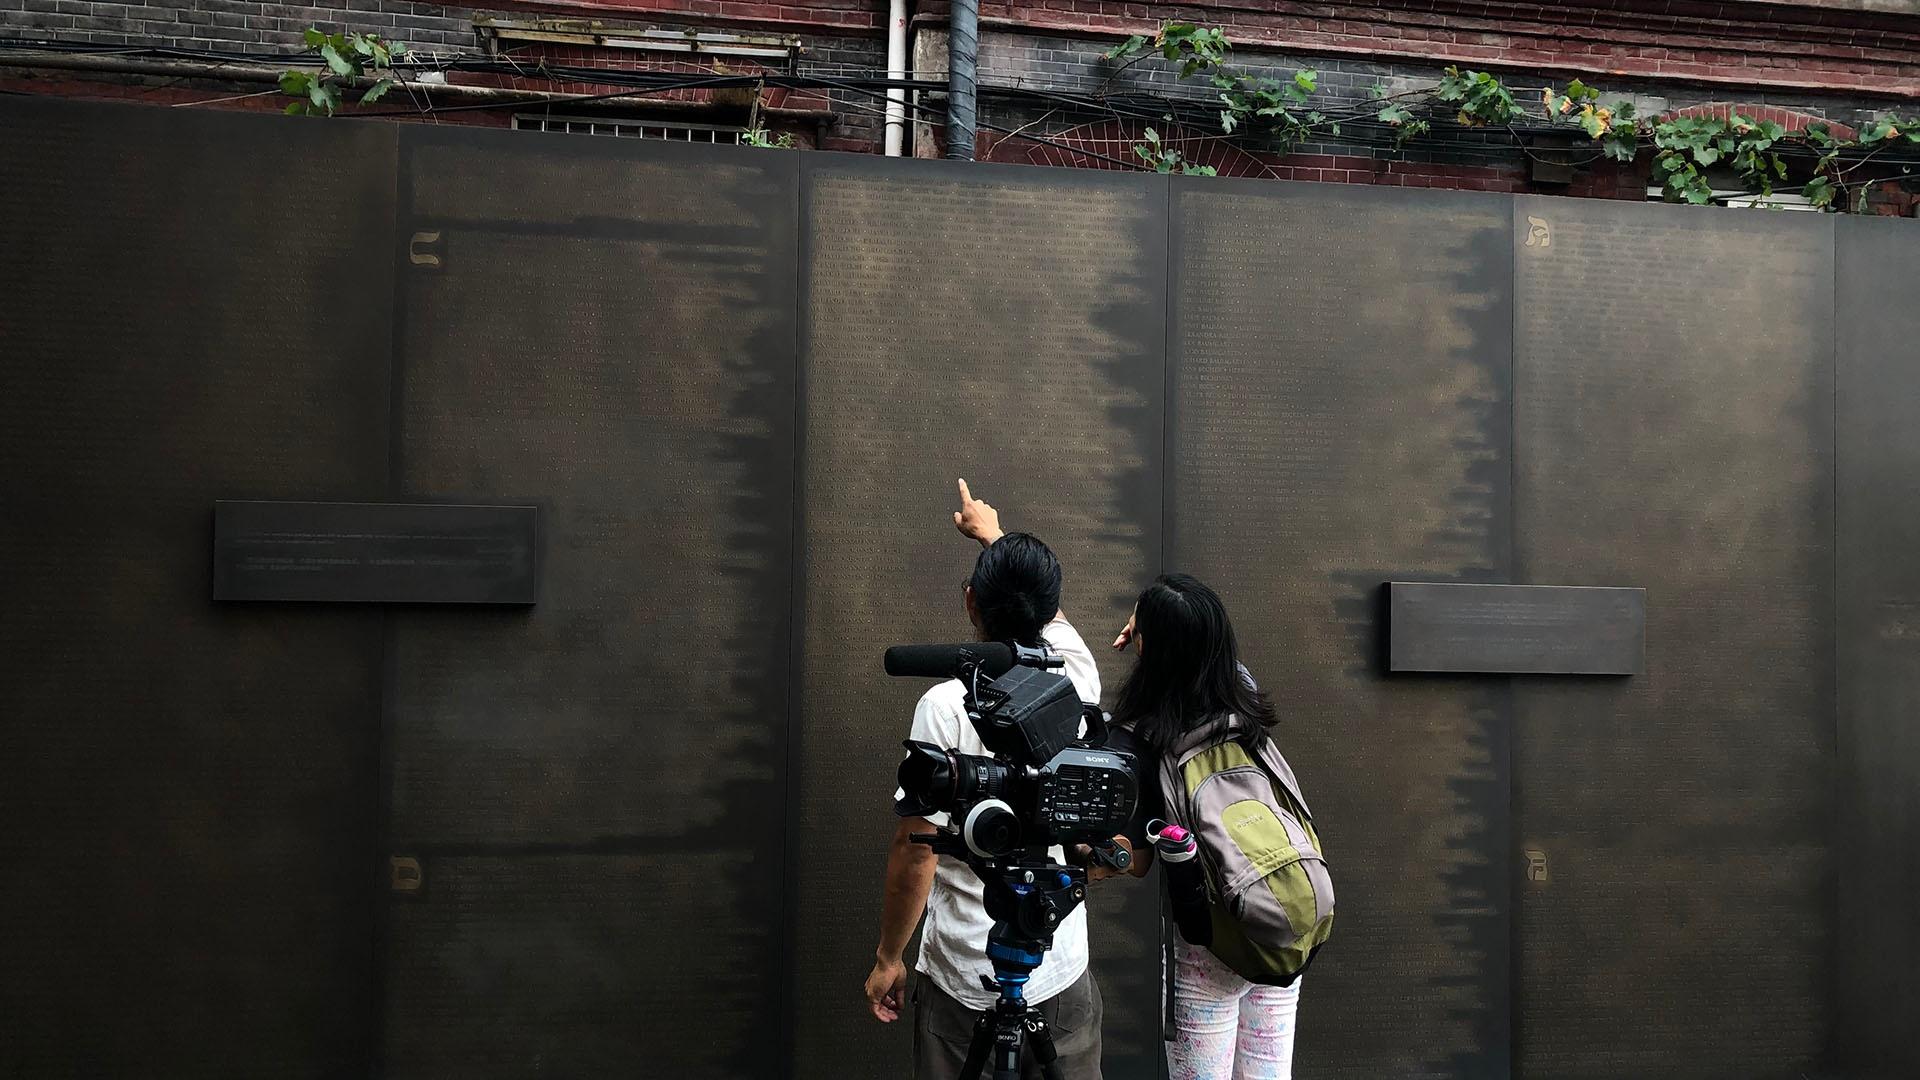 Violet and one of the directors of photography, Jason Wong, at the Shanghai Museum Wall.